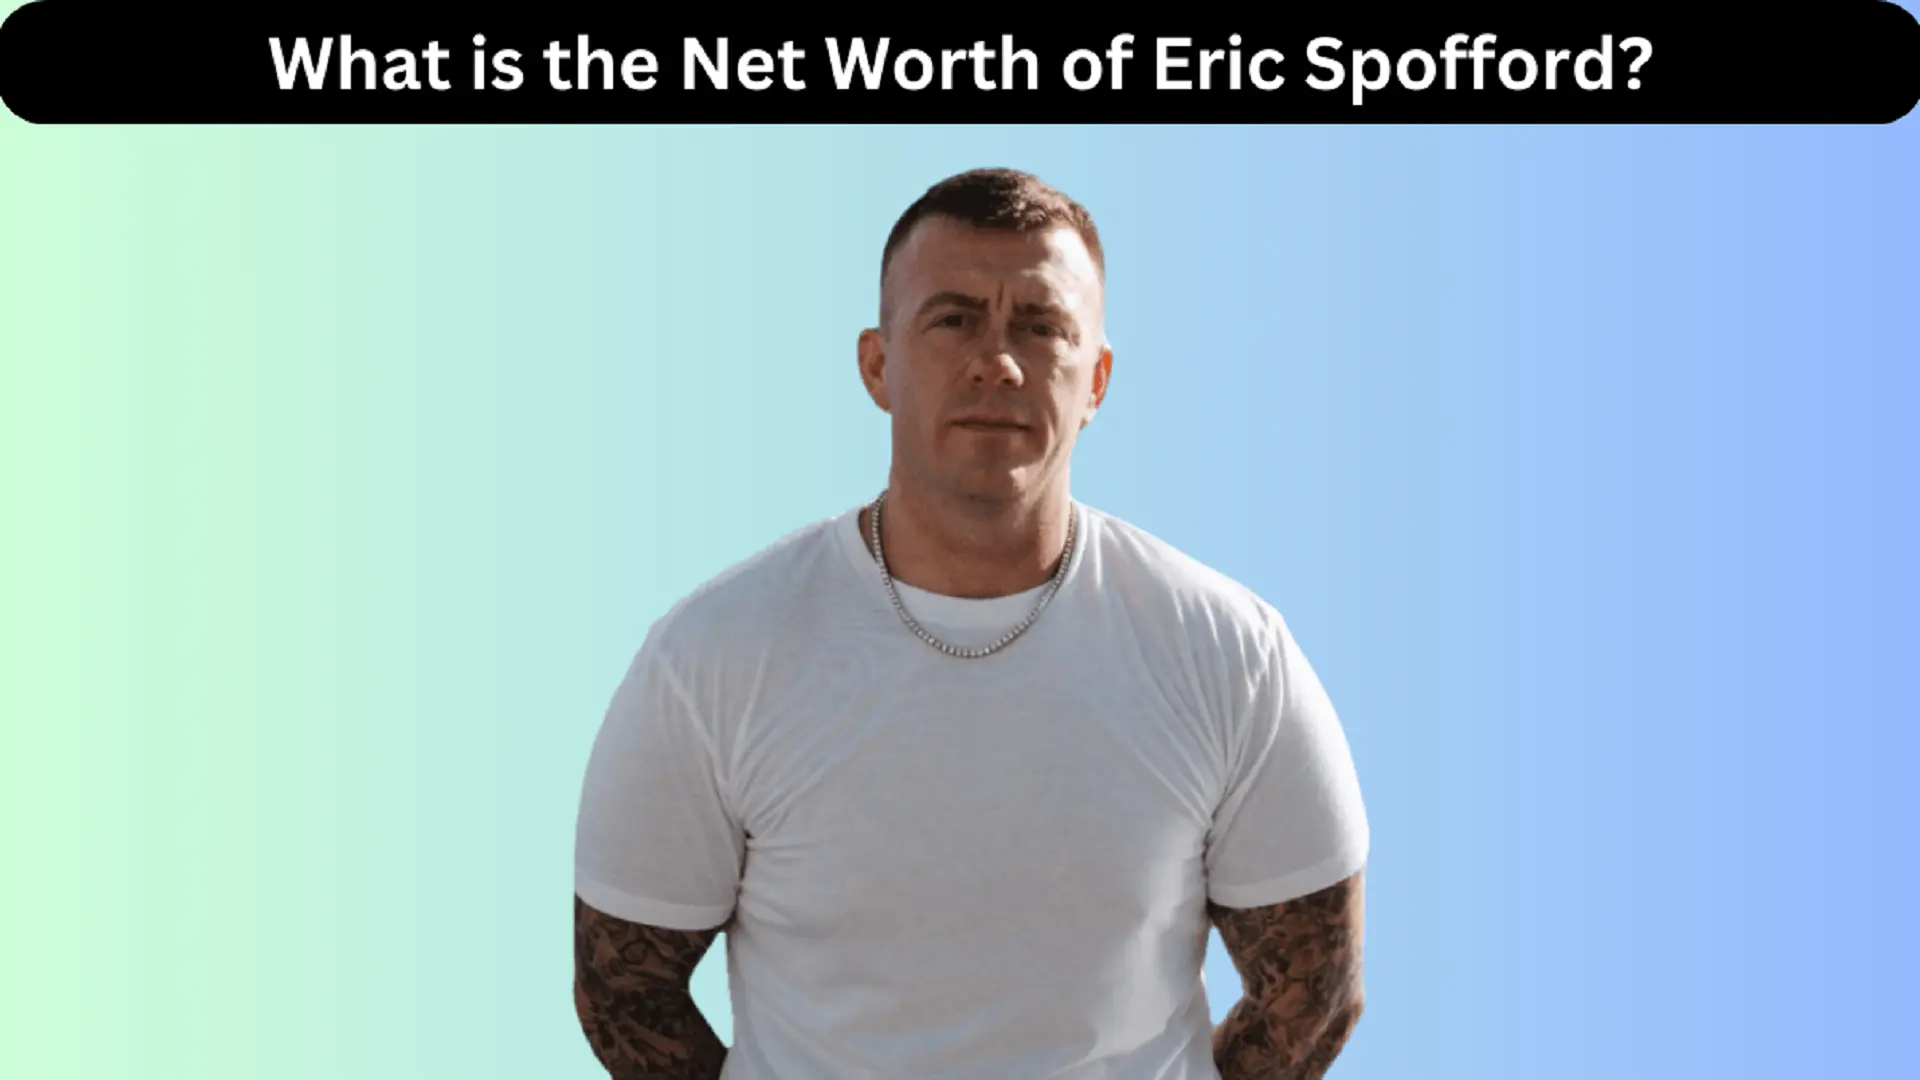 What is the Net Worth of Eric Spofford